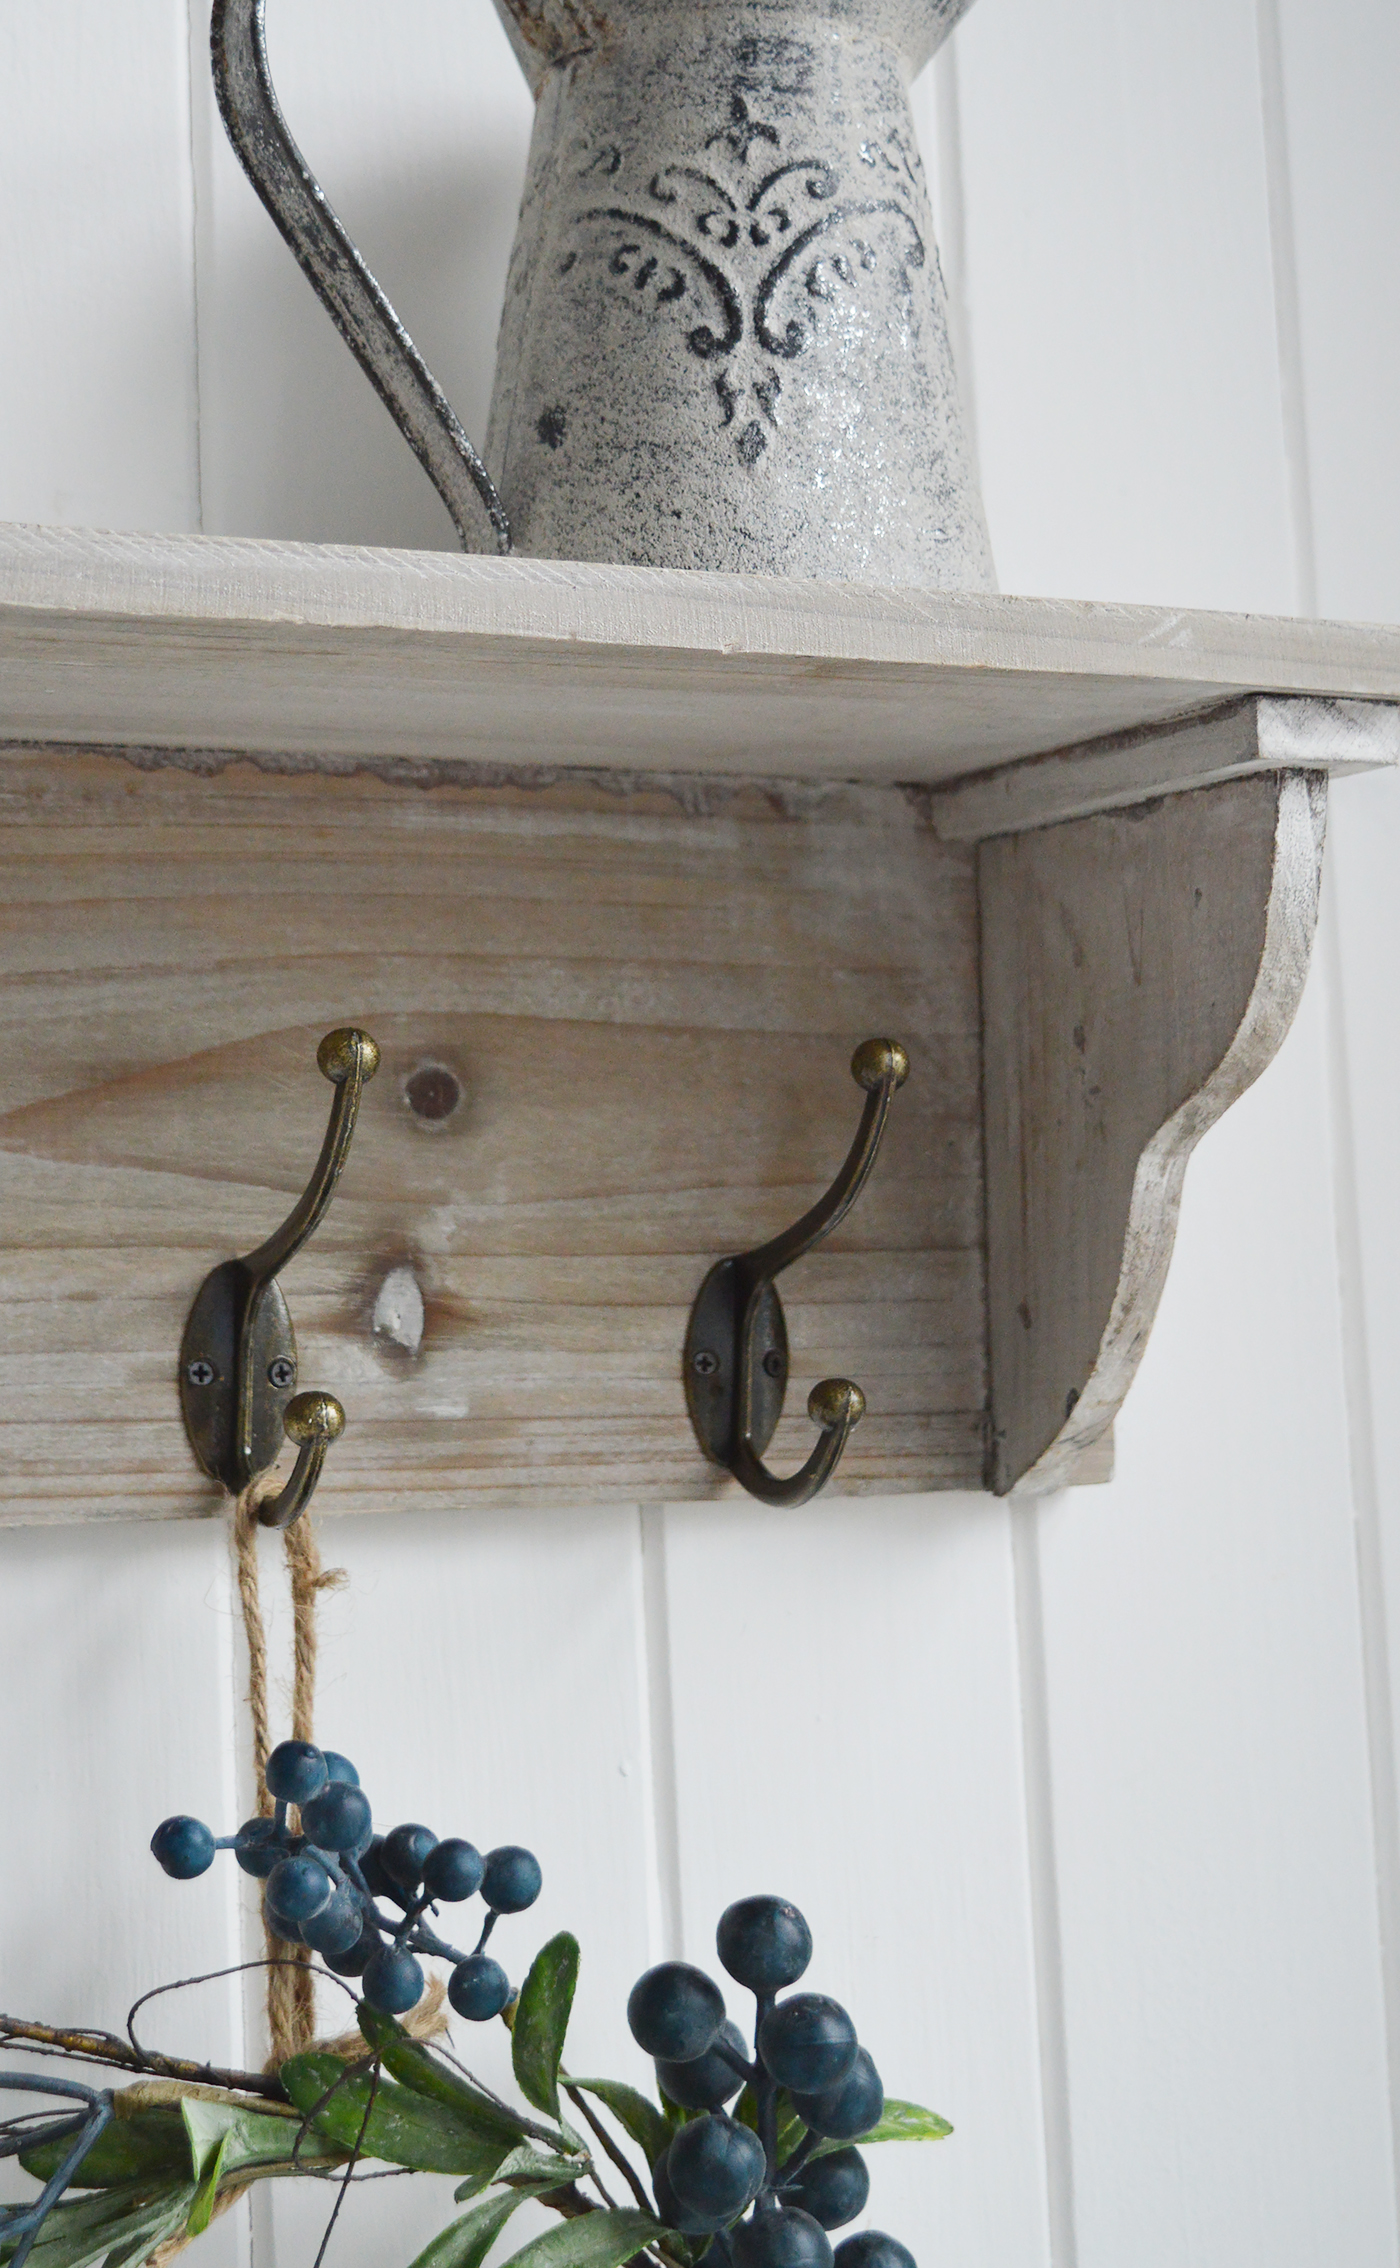 Pawtucket grey wooden wall shelf with hooks from The White Lighthouse. White Furniture and accessories for the bedroom, bathroom, hall and living room in coastal, New England and country homes and interiors